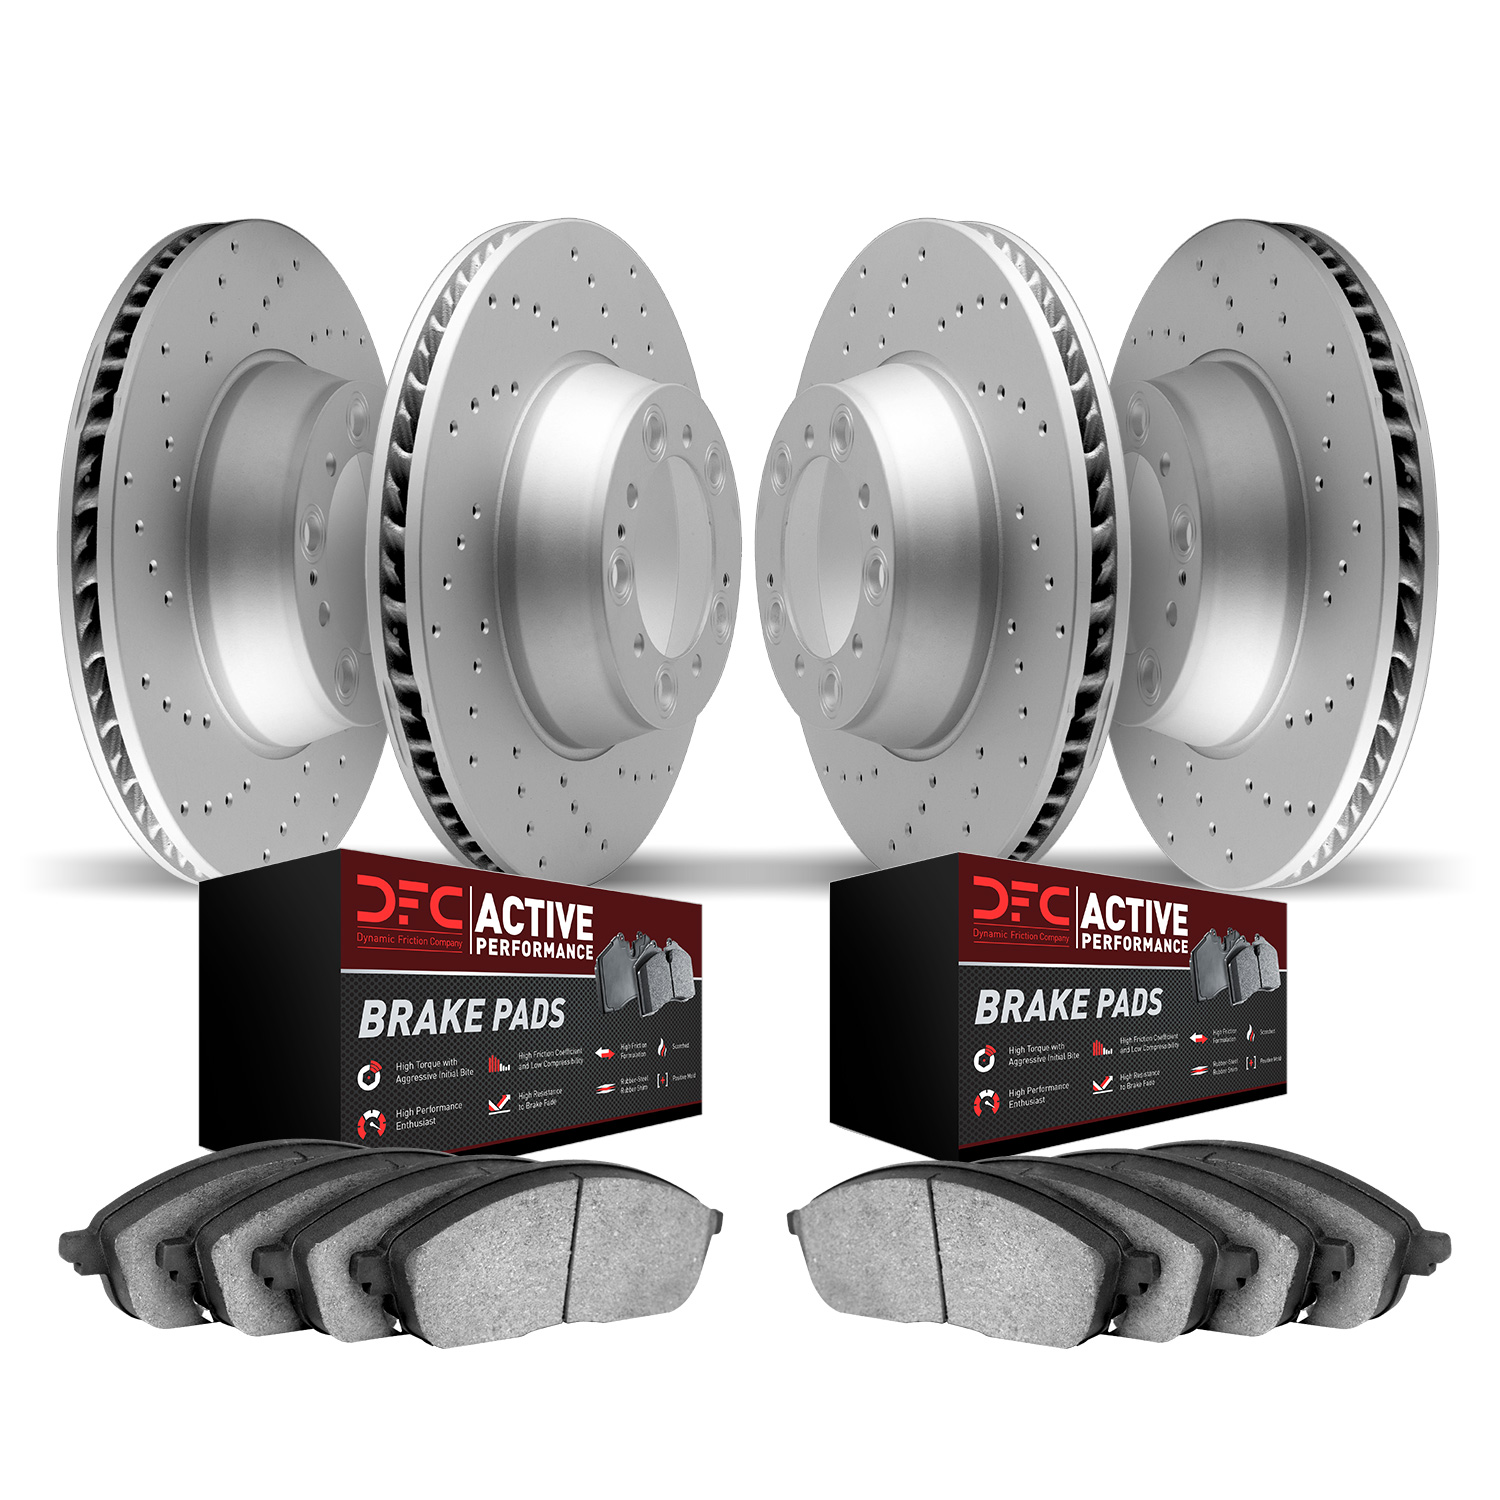 2704-31078 Geoperformance Drilled Brake Rotors with Active Performance Pads Kit, 2006-2006 BMW, Position: Front and Rear